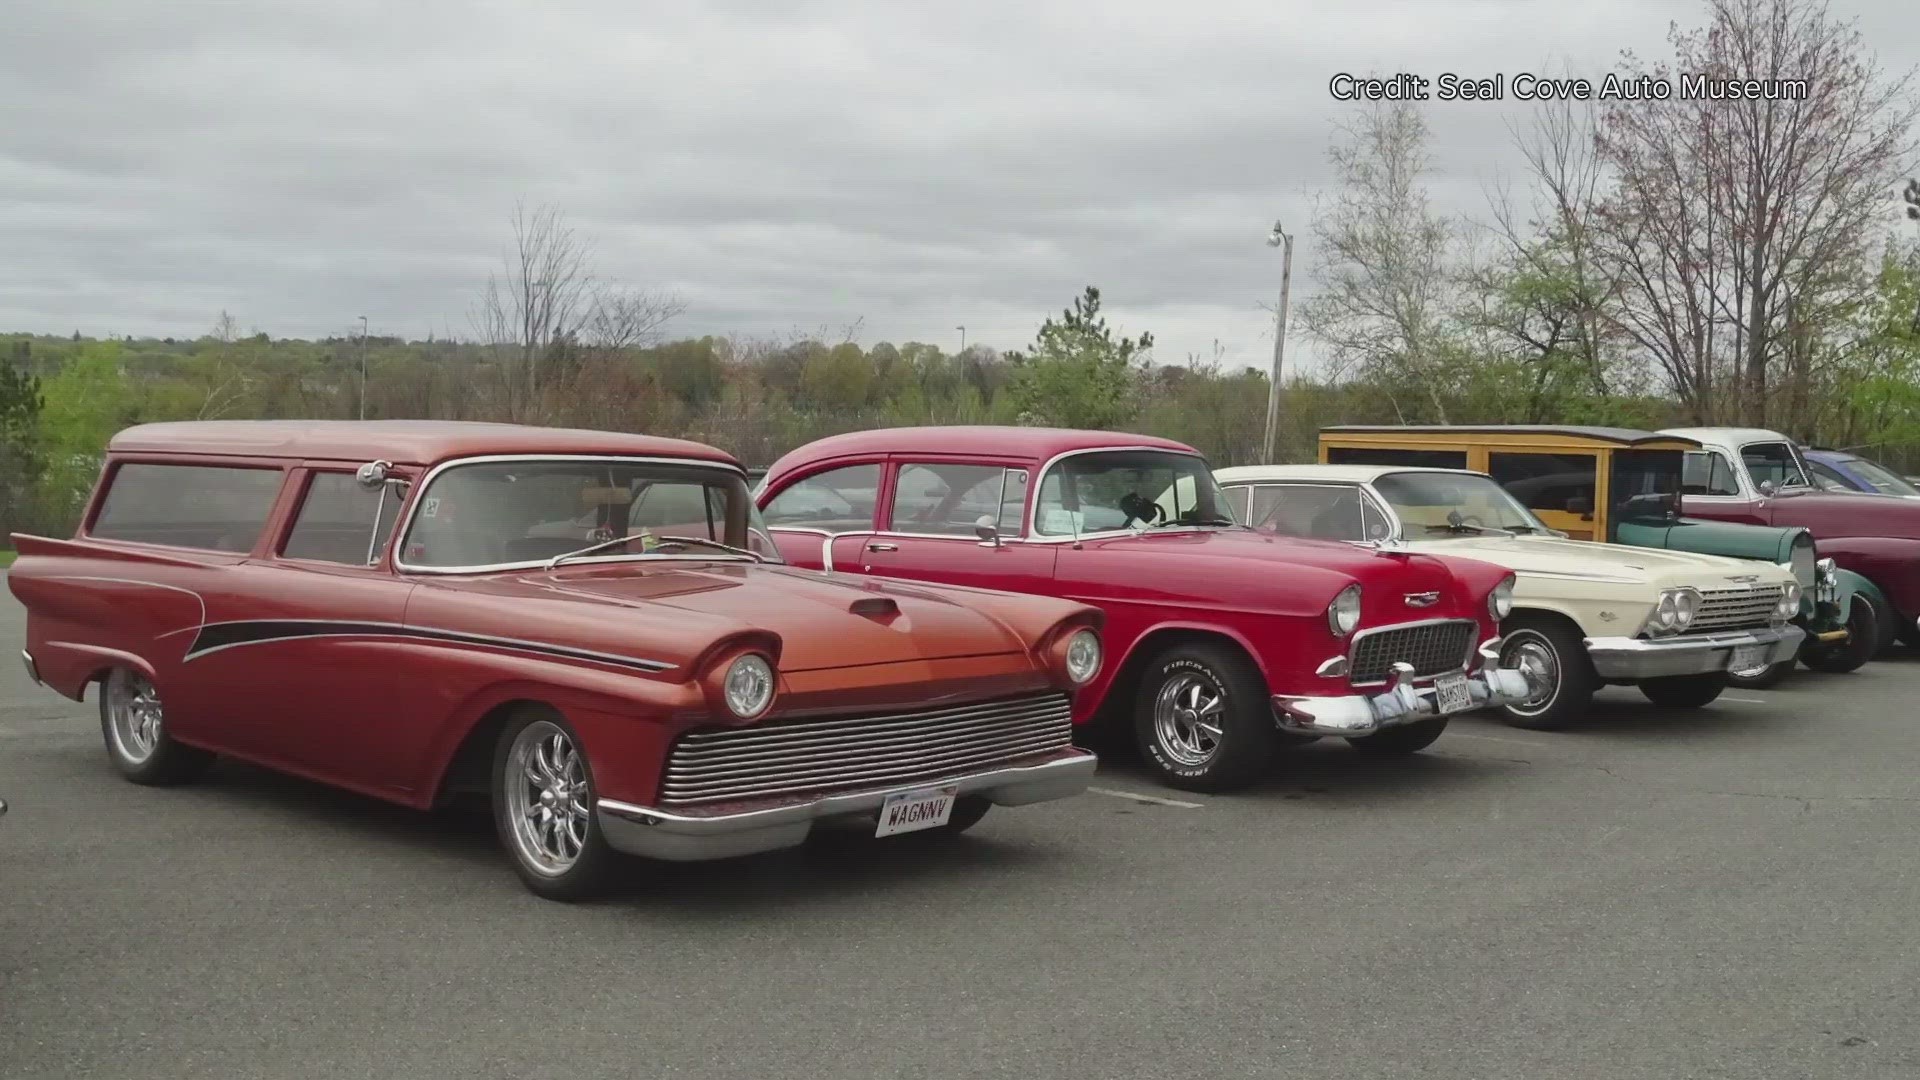 the show is part of the Central Maine Street Rods Club, and it also celebrates the 60th anniversary of the Seal Cove museum.